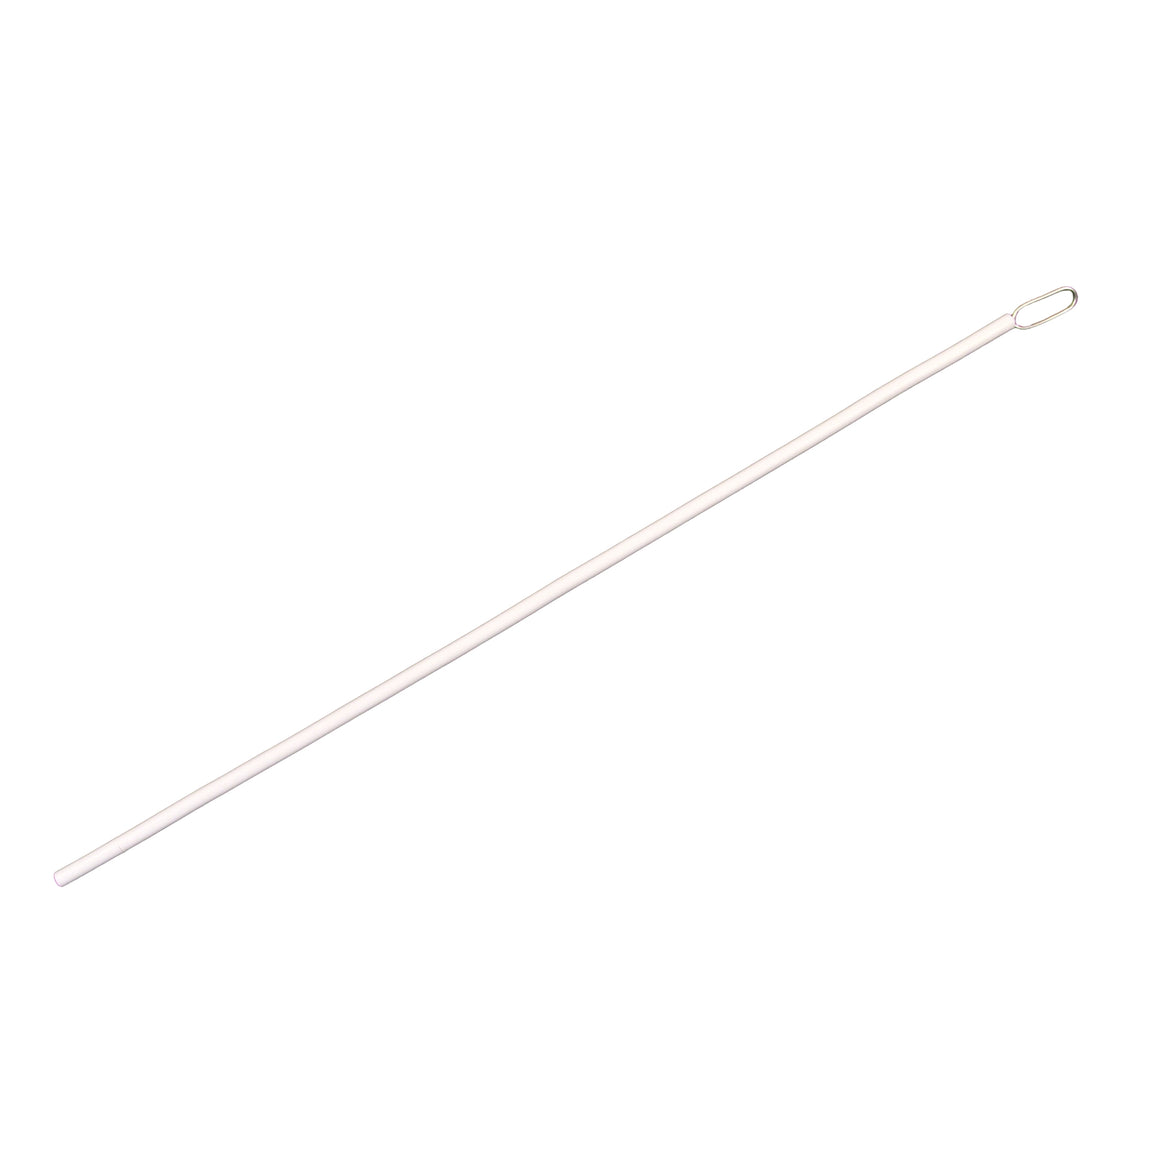 MISC CRFL Flute Rod Synthetic